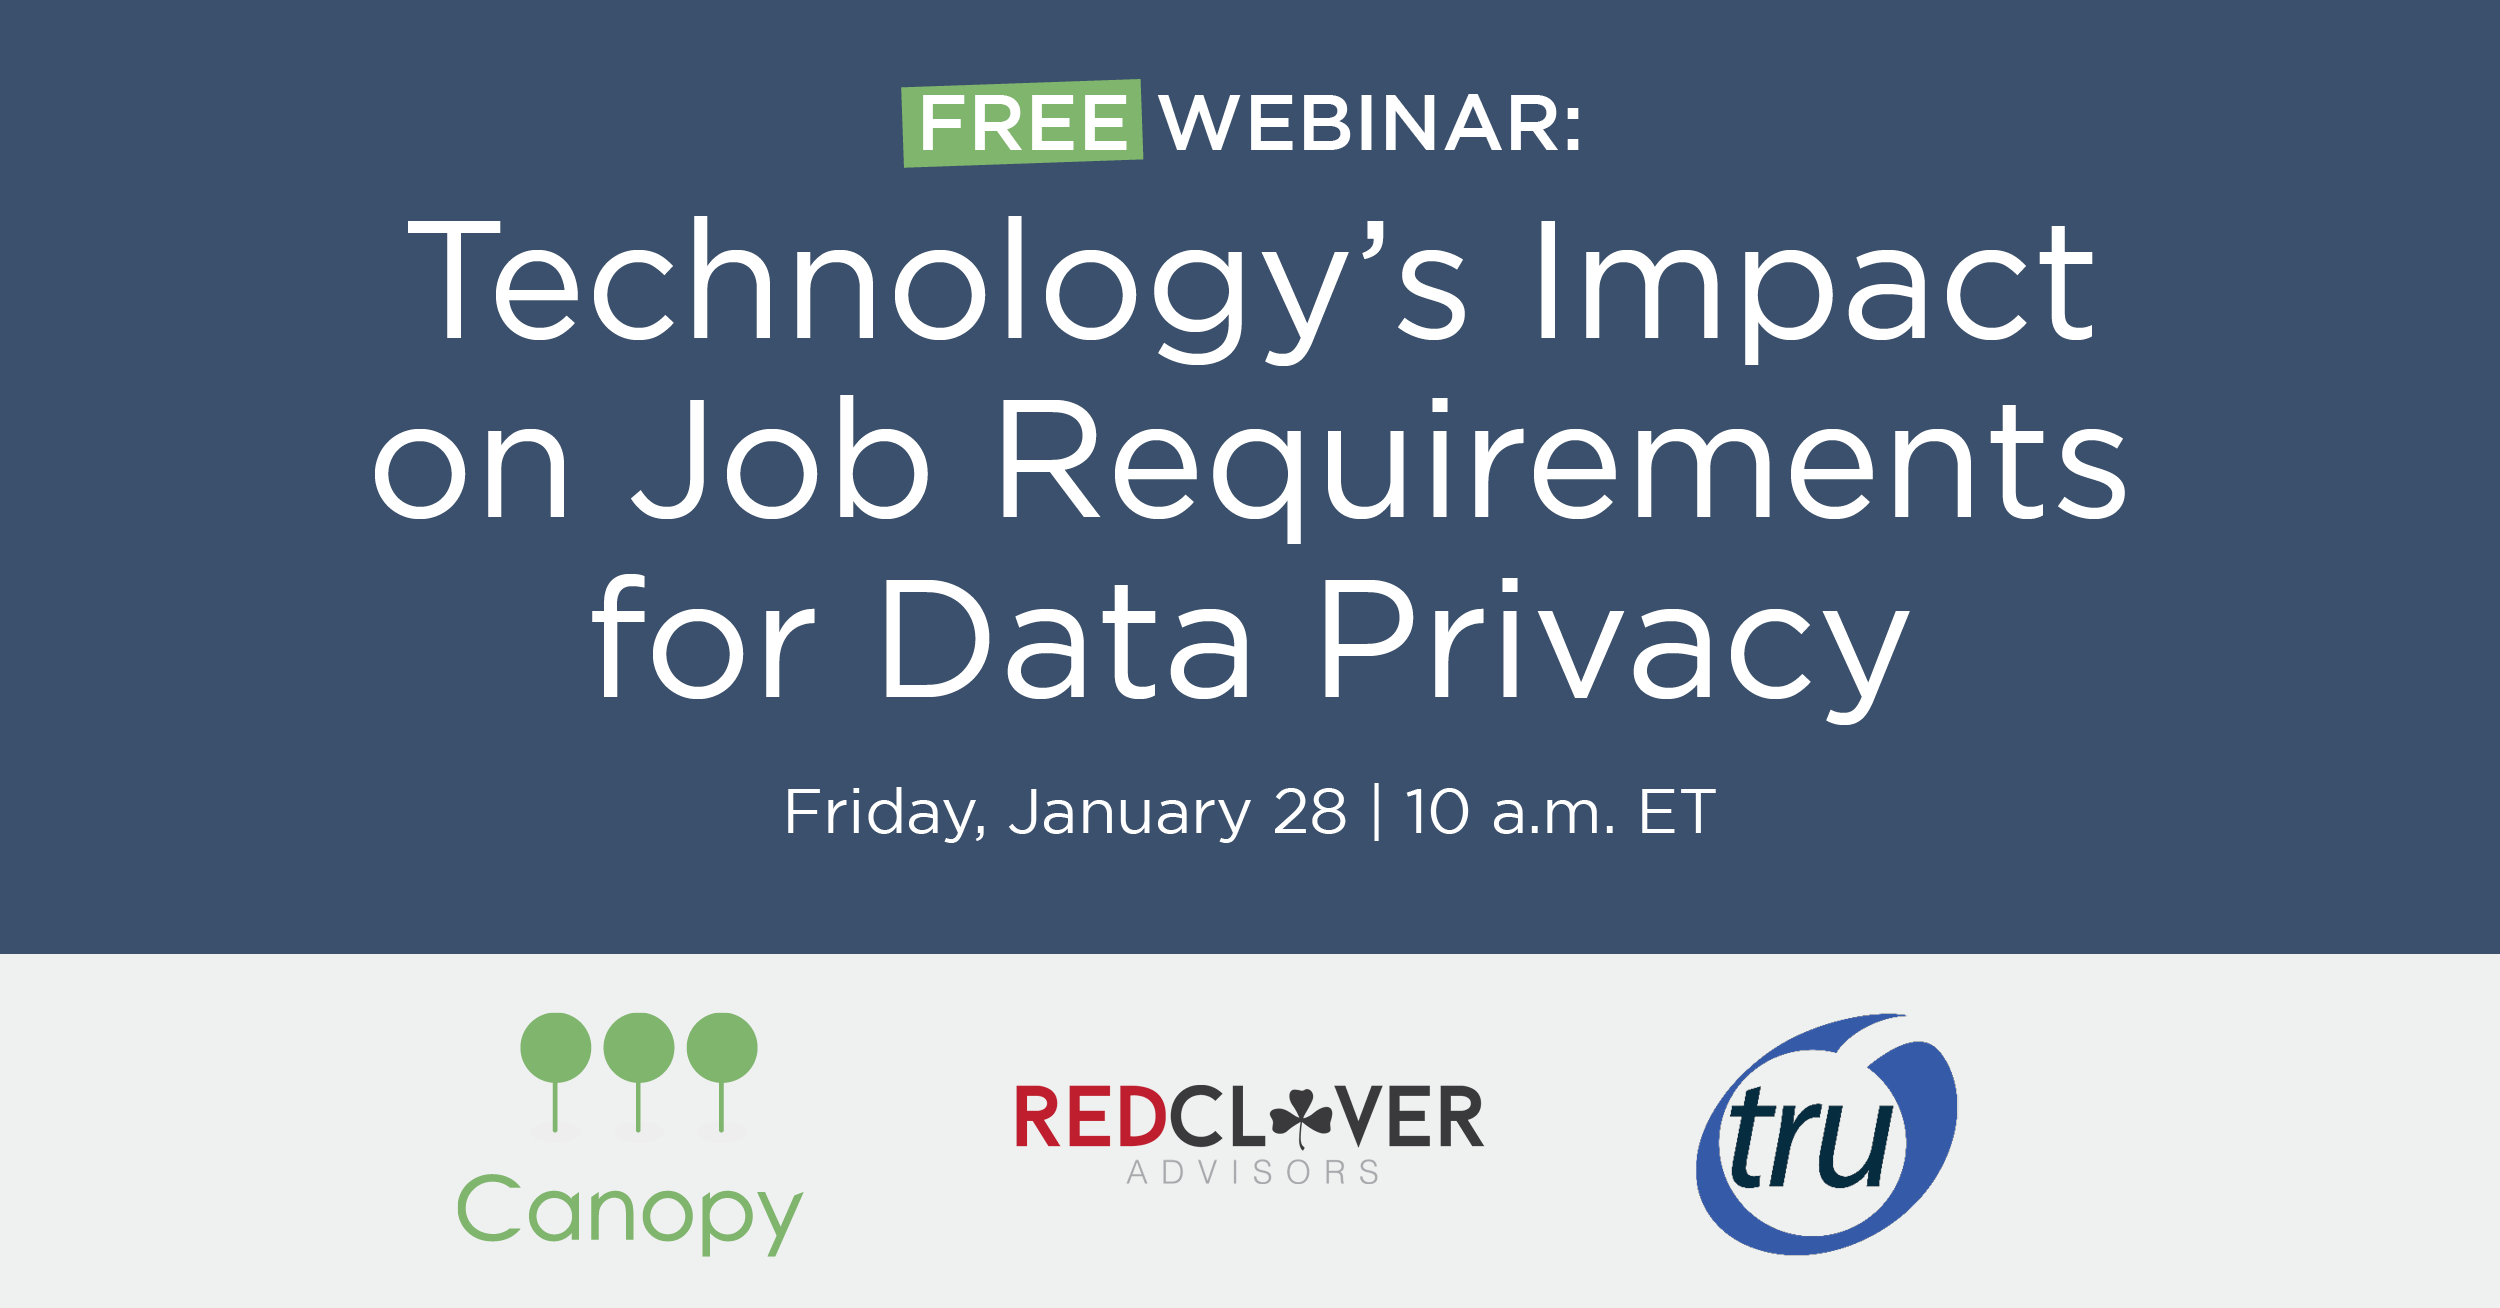 Free Webinar: technology's impact on job requirements for data privacy with Canopy, Red Clover Advisors, and TRU logos